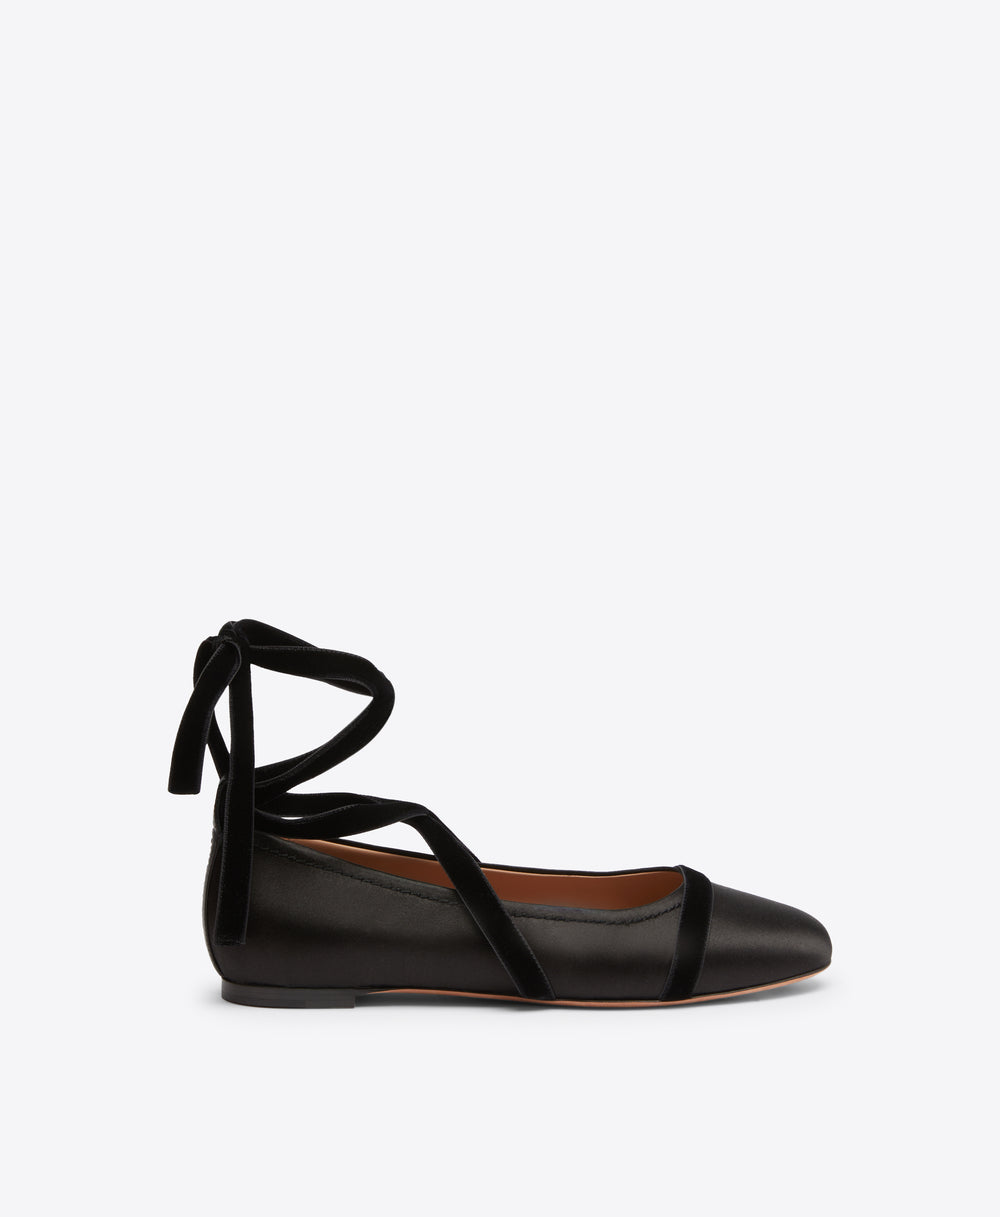 Spencer Black Satin Flats with Velvet Ribbons Malone Souliers